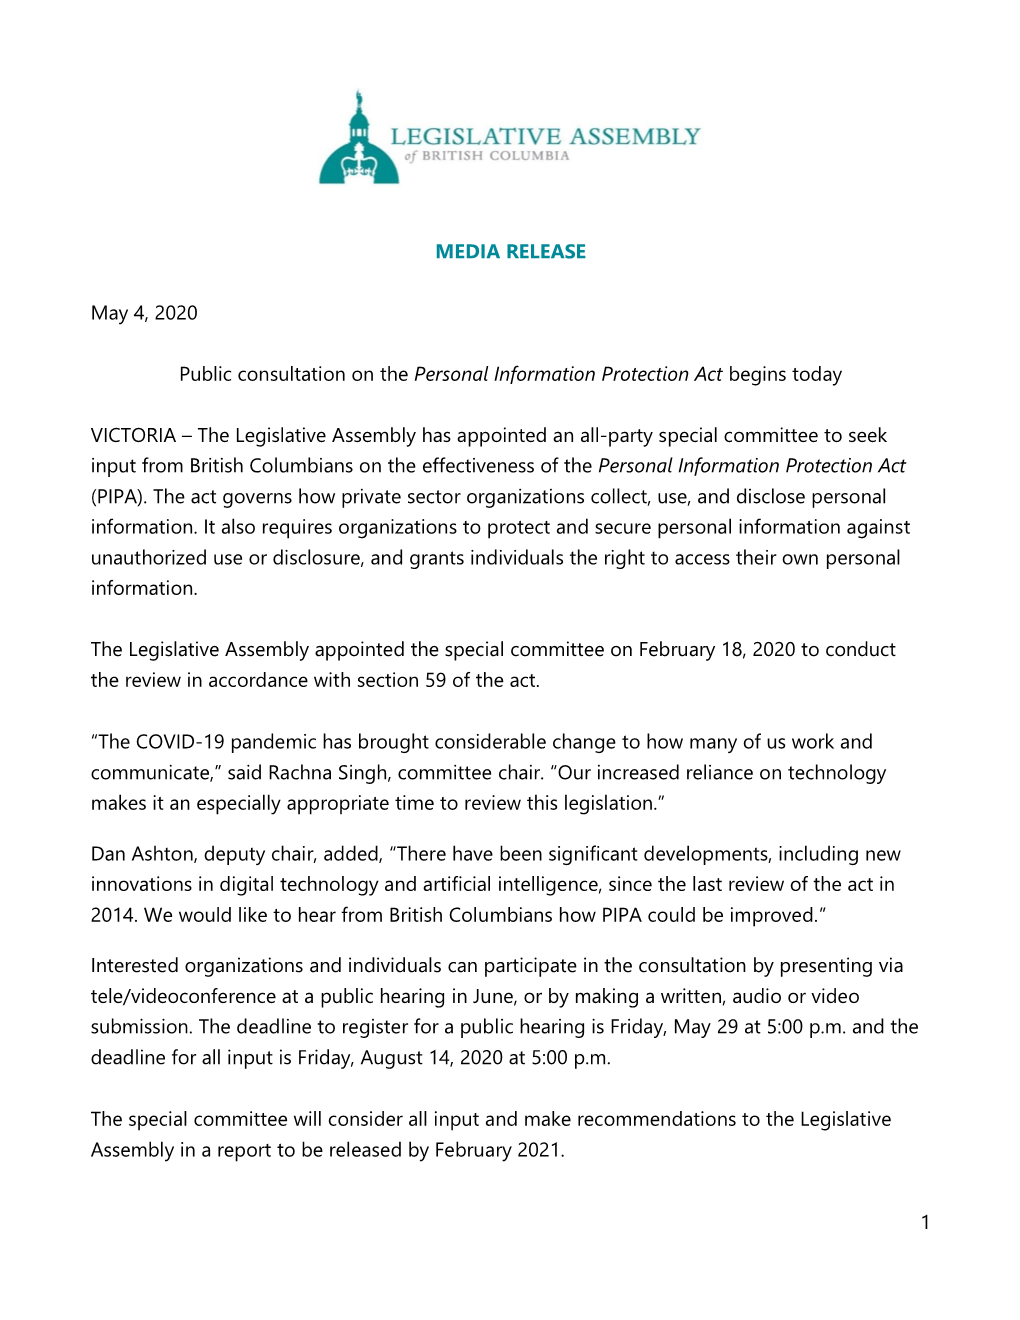 1 MEDIA RELEASE May 4, 2020 Public Consultation on the Personal